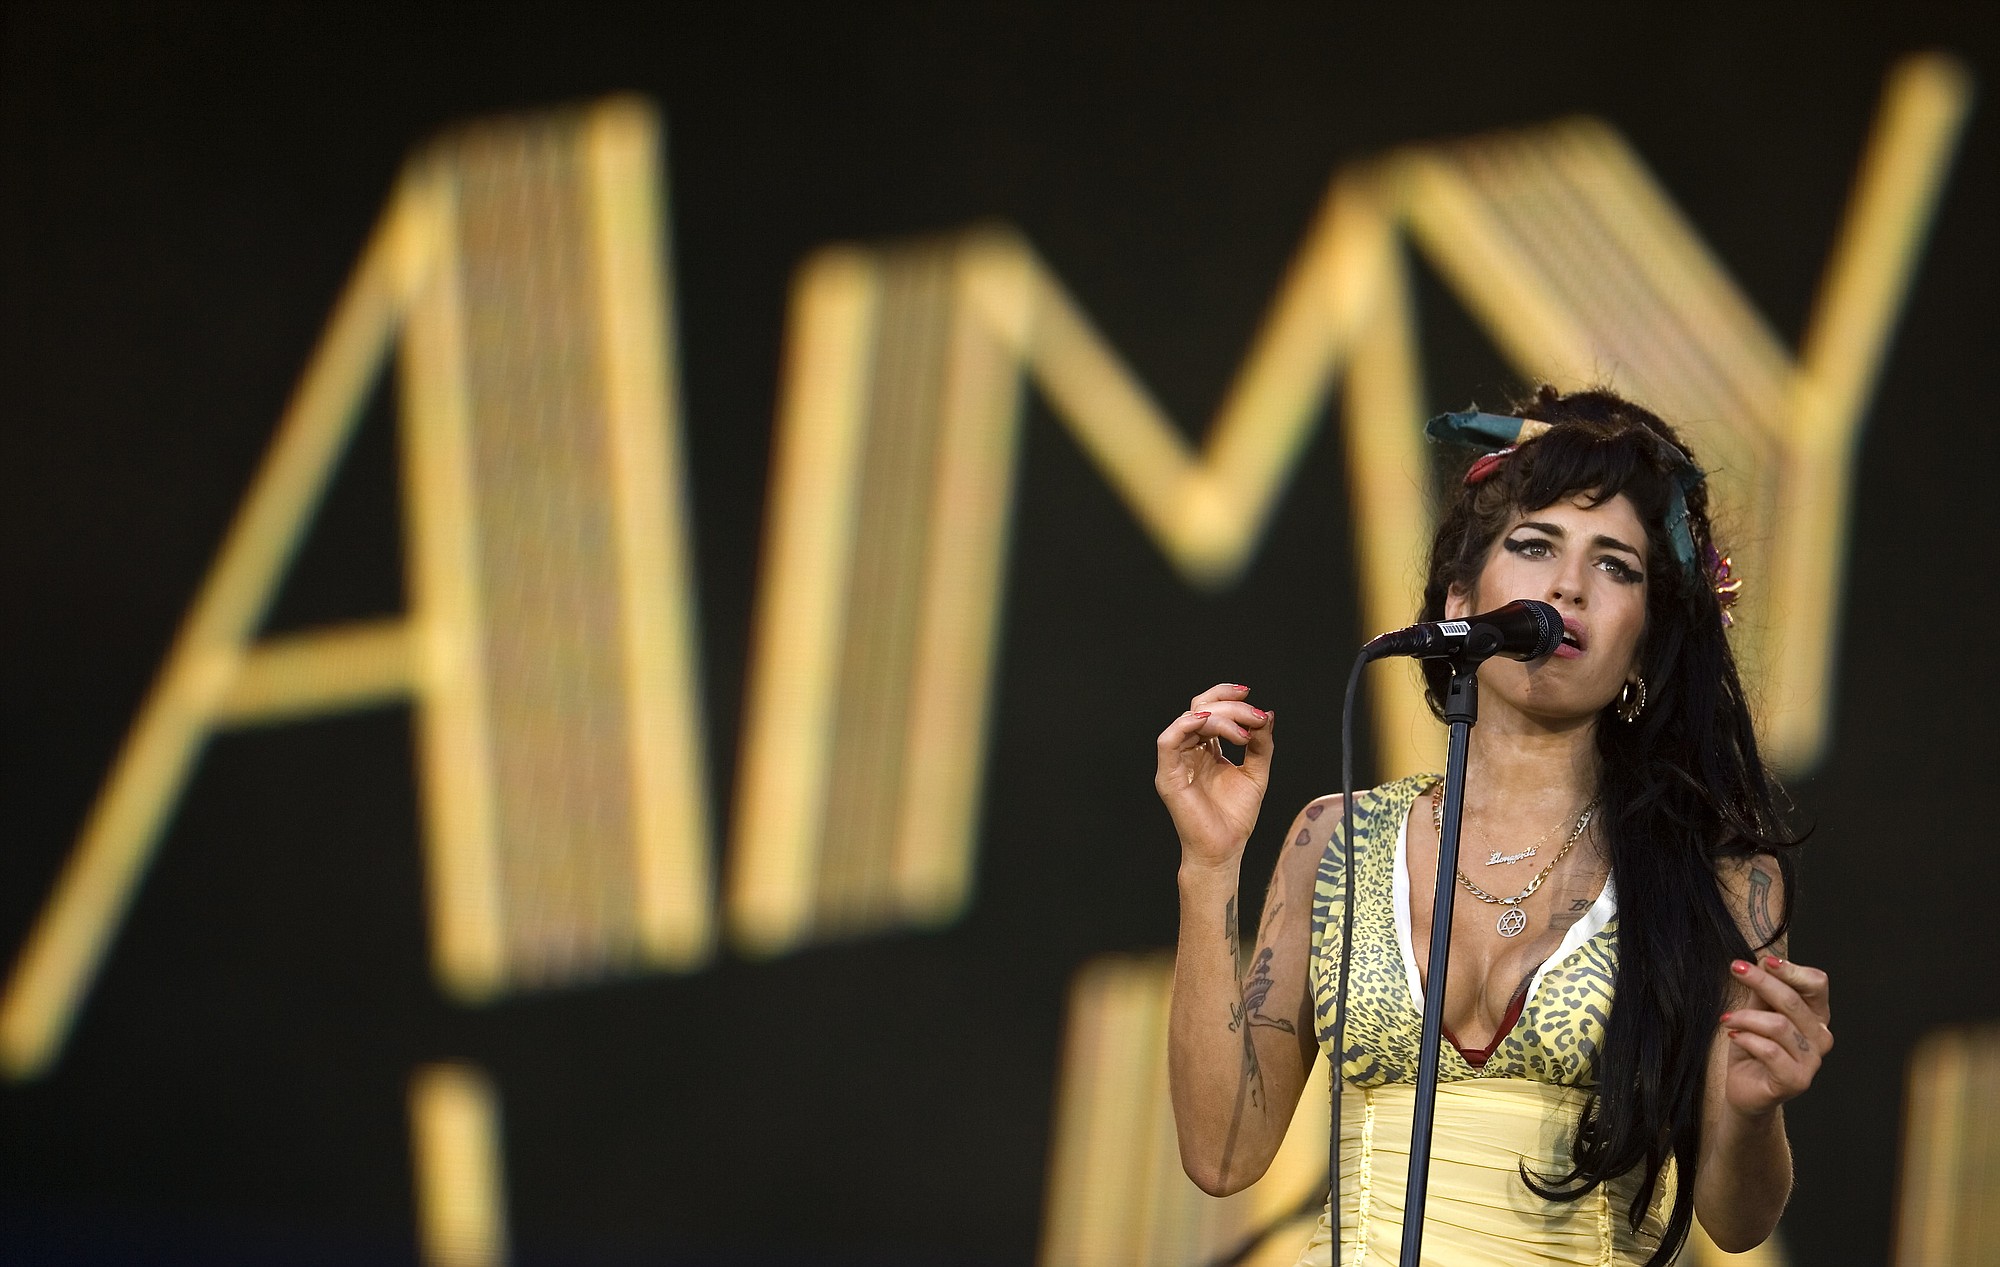 Associated Press files
Singer Amy Winehouse performs during the 2008 Rock in Rio music festival in Arganda del Rey, on the outskirts of Madrid. Winehouse died at 27 of alcohol poisoning in 2011.